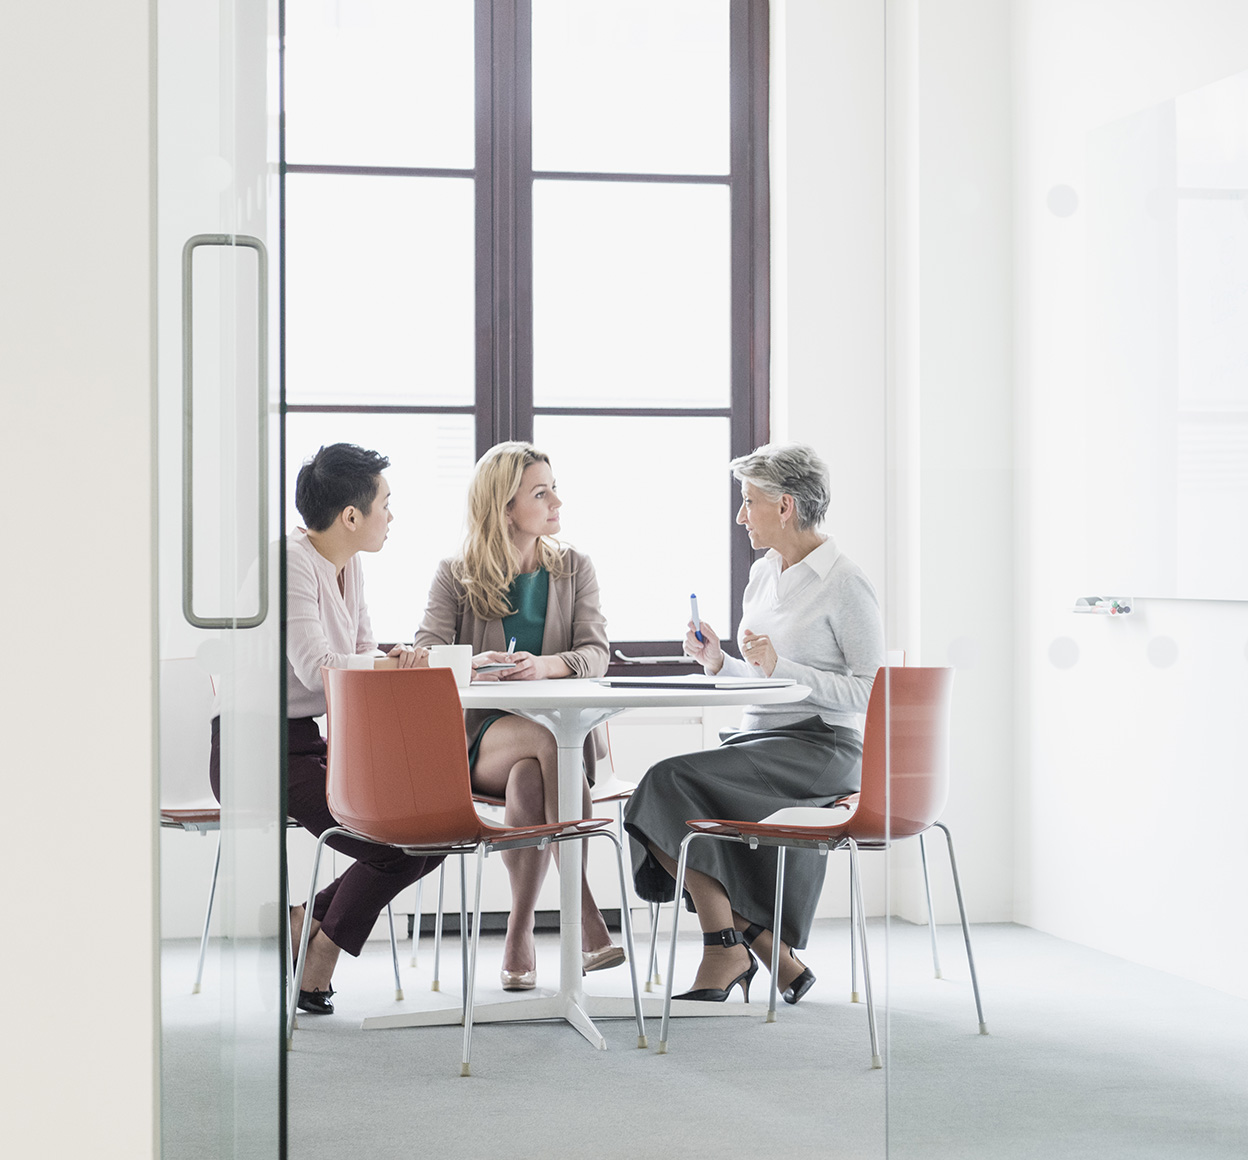 Three businesswomen hold a meeting in an office